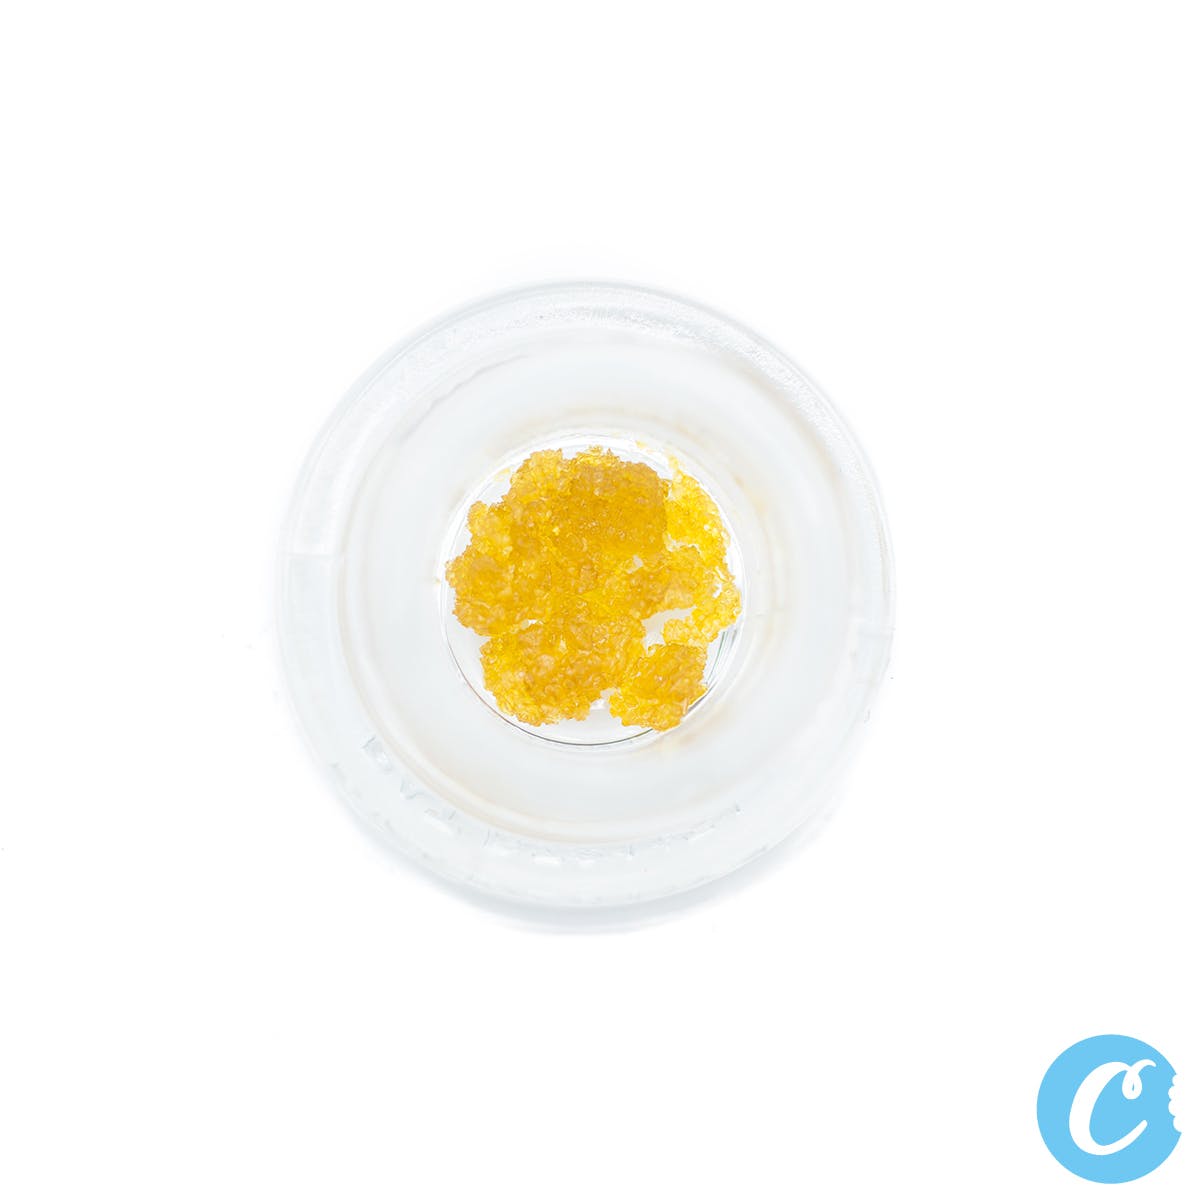 Key Extracts - Bio Diesel Live Resin (500MG)